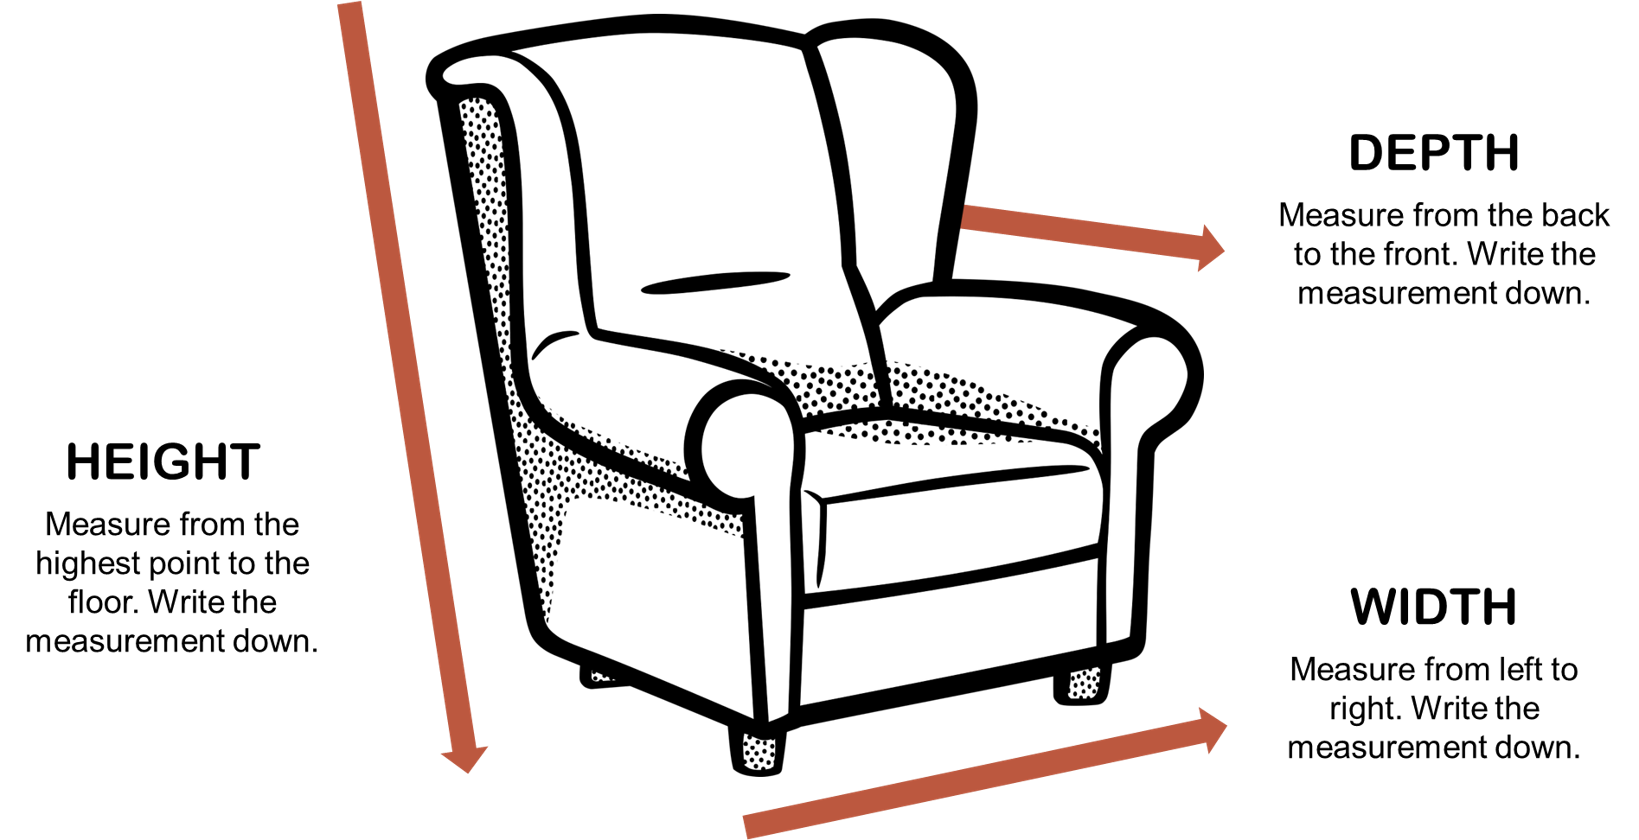 Highback chair vector with measuring guides and how to text.